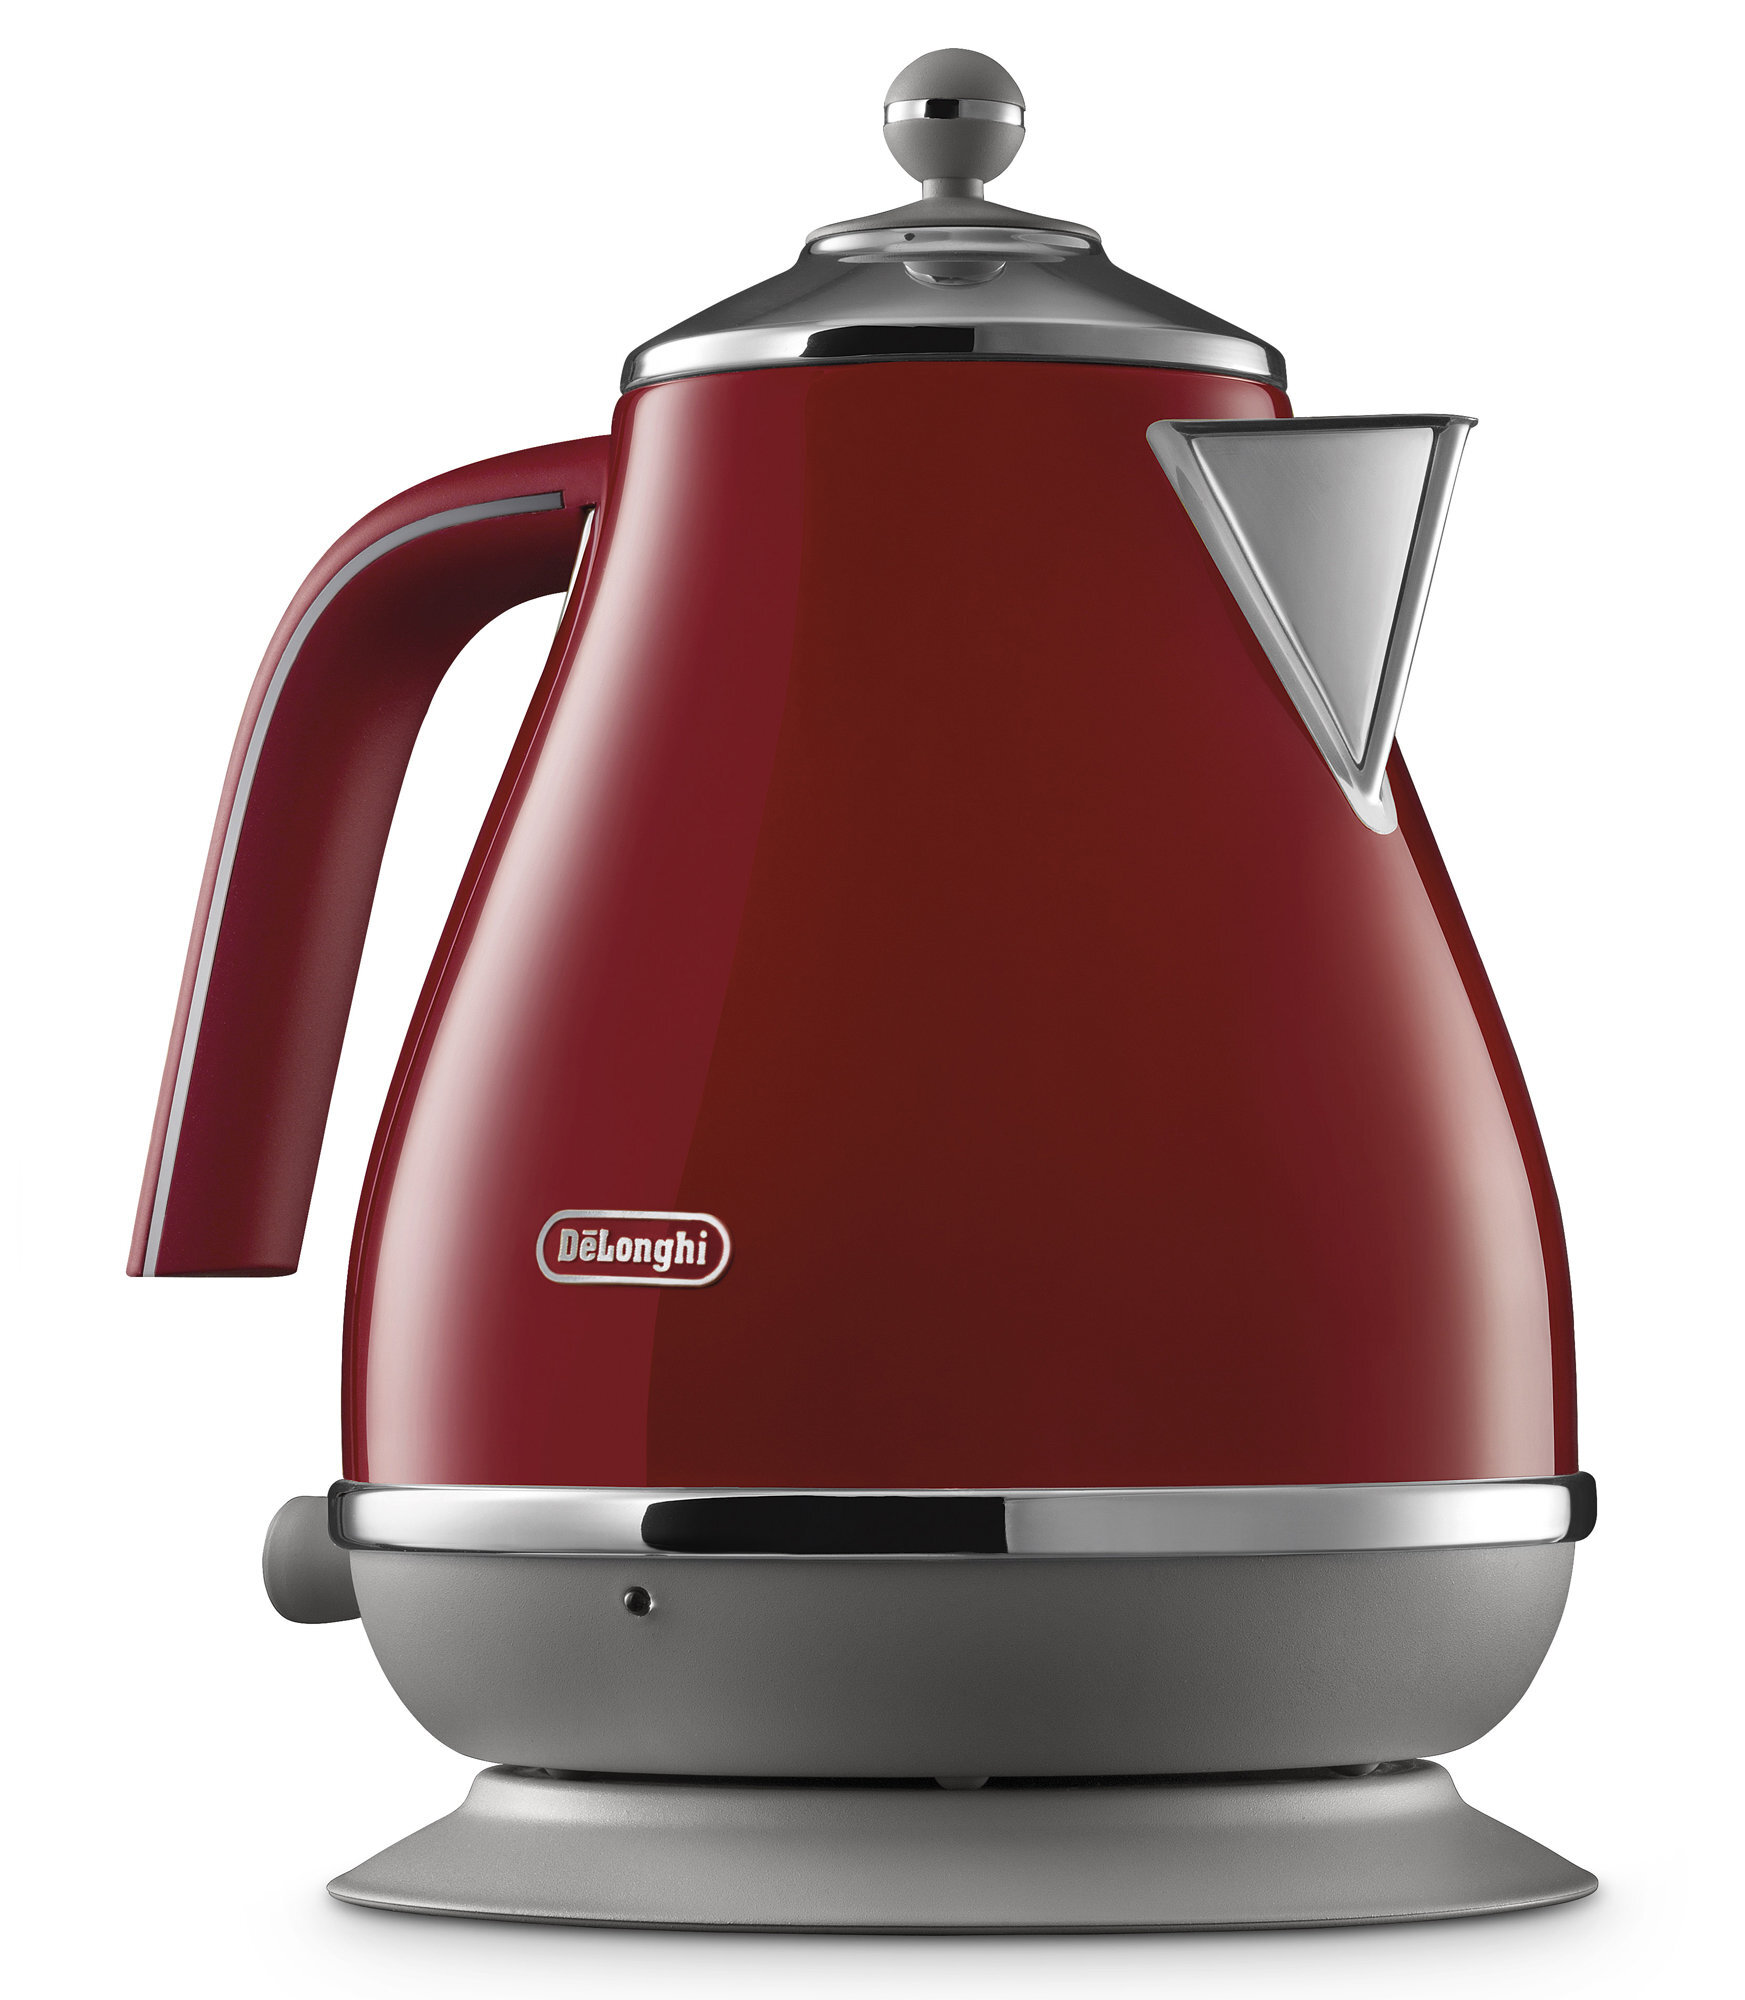 DeLonghi 1.7L Tokyo Red Cordless Electric Hot Water Kettle 3000